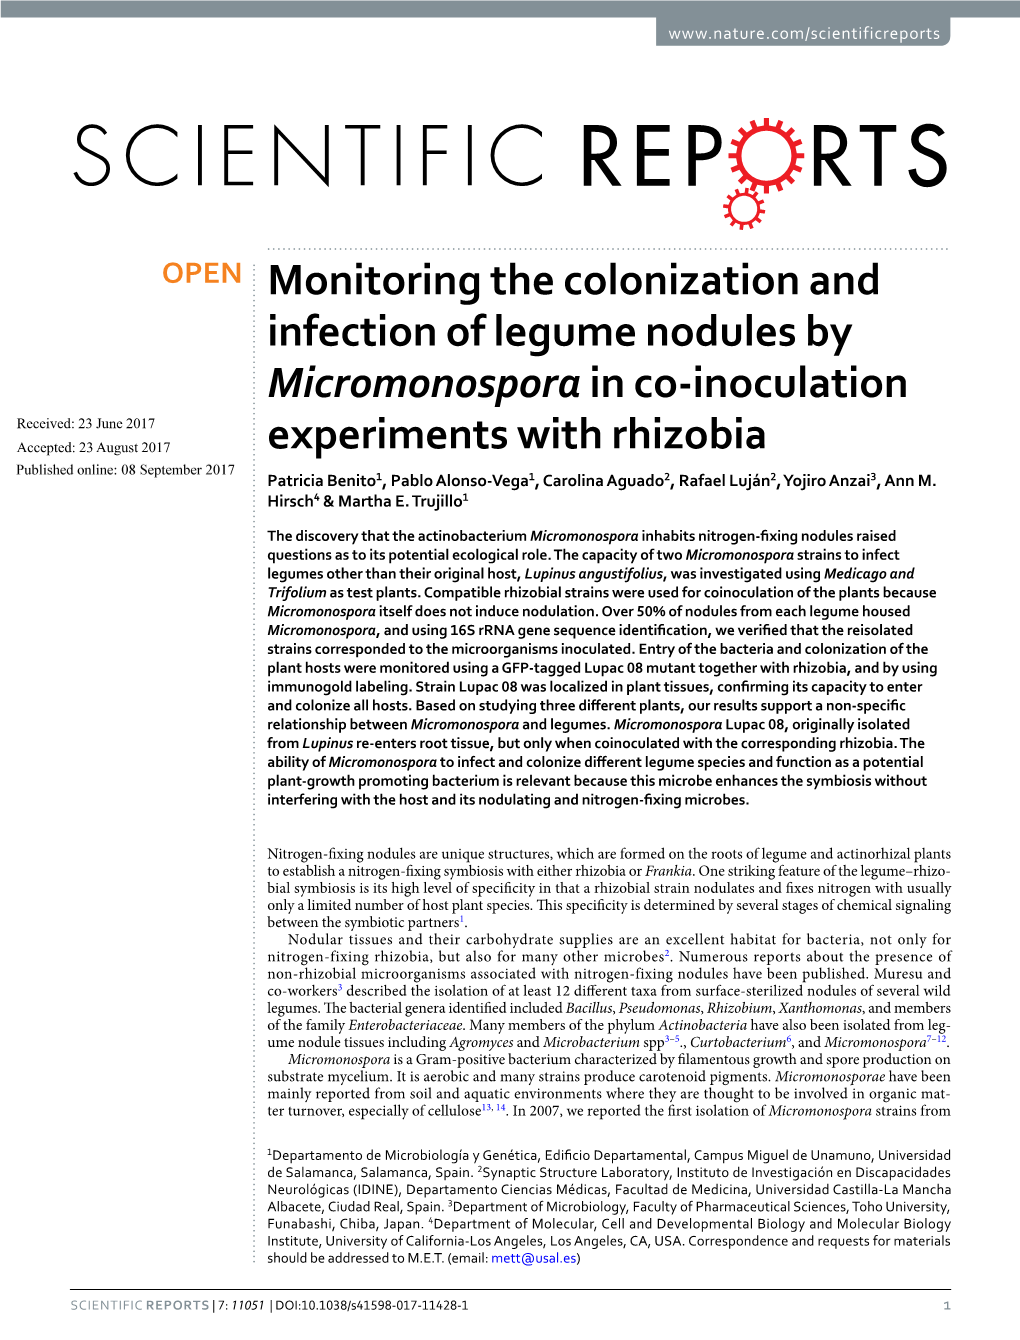 Monitoring the Colonization and Infection of Legume Nodules By